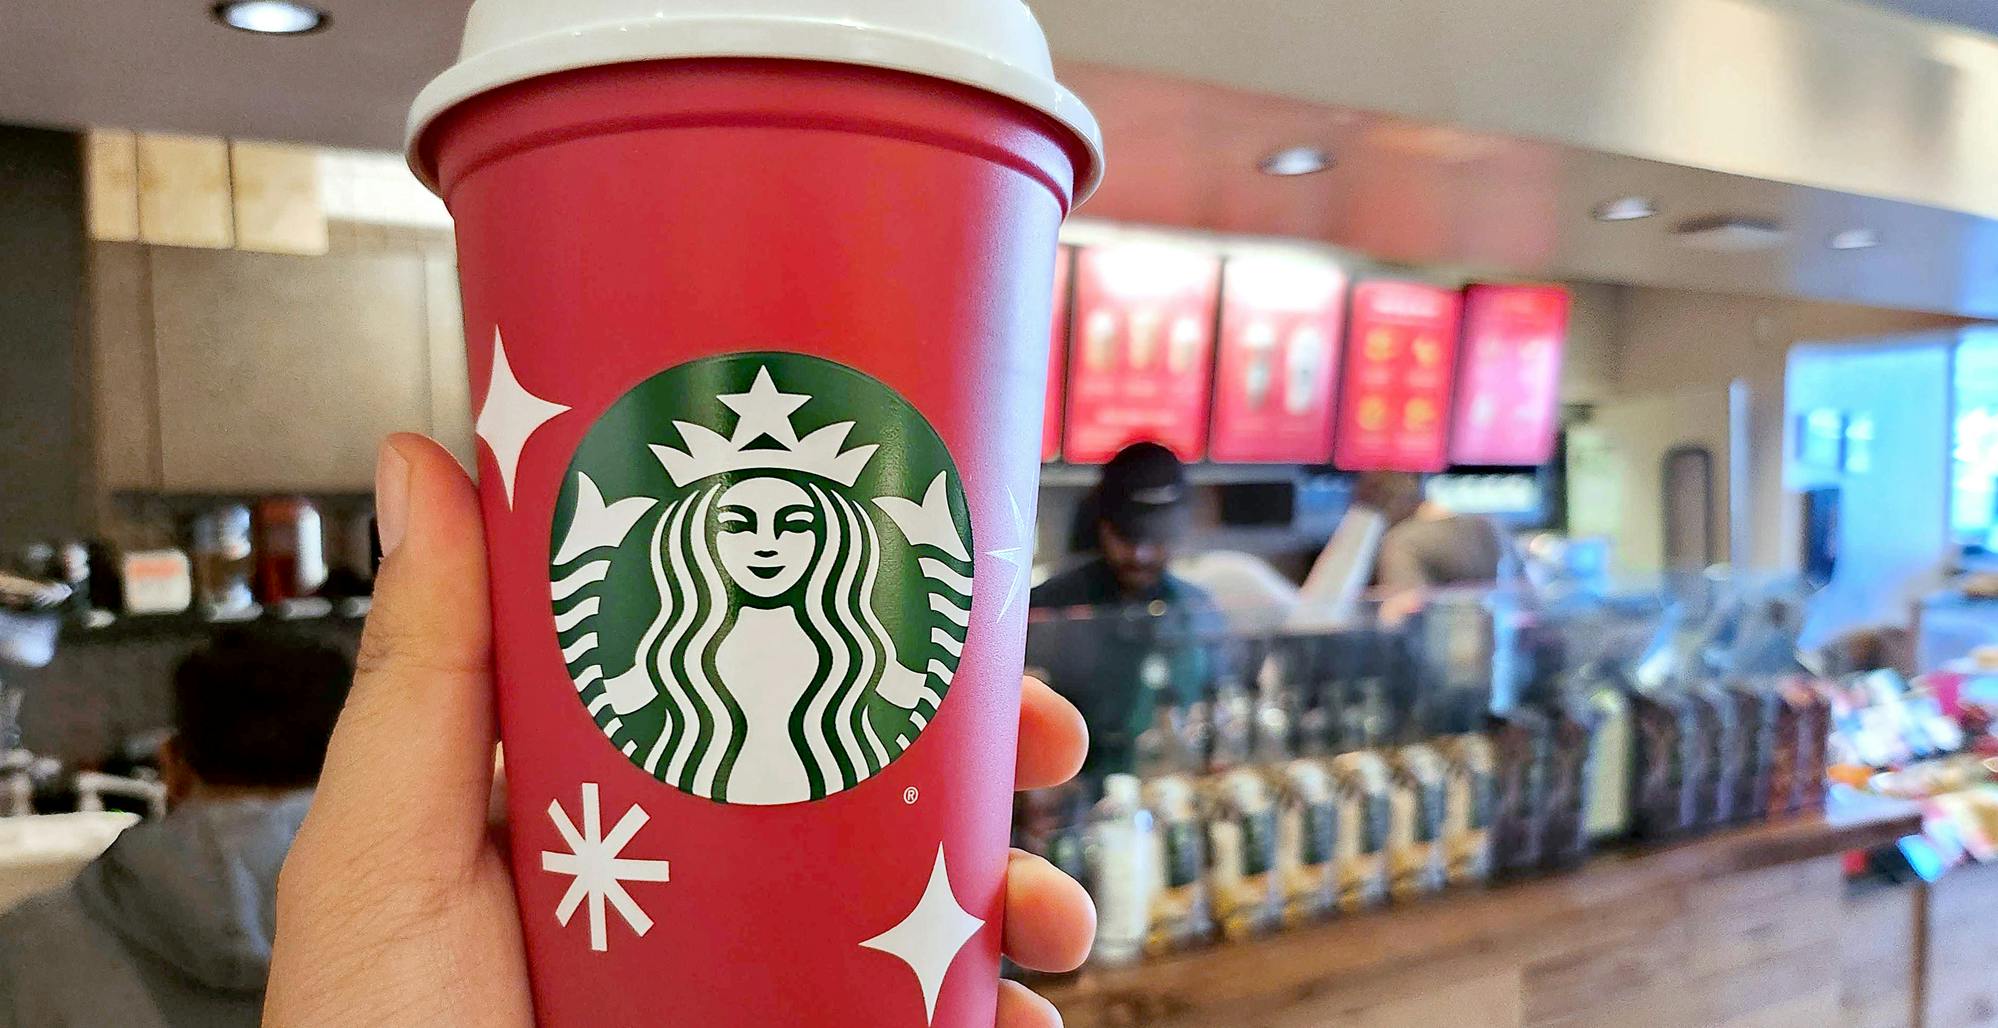 Starbucks Red Cup Day: Here's How to Get the Free Cup